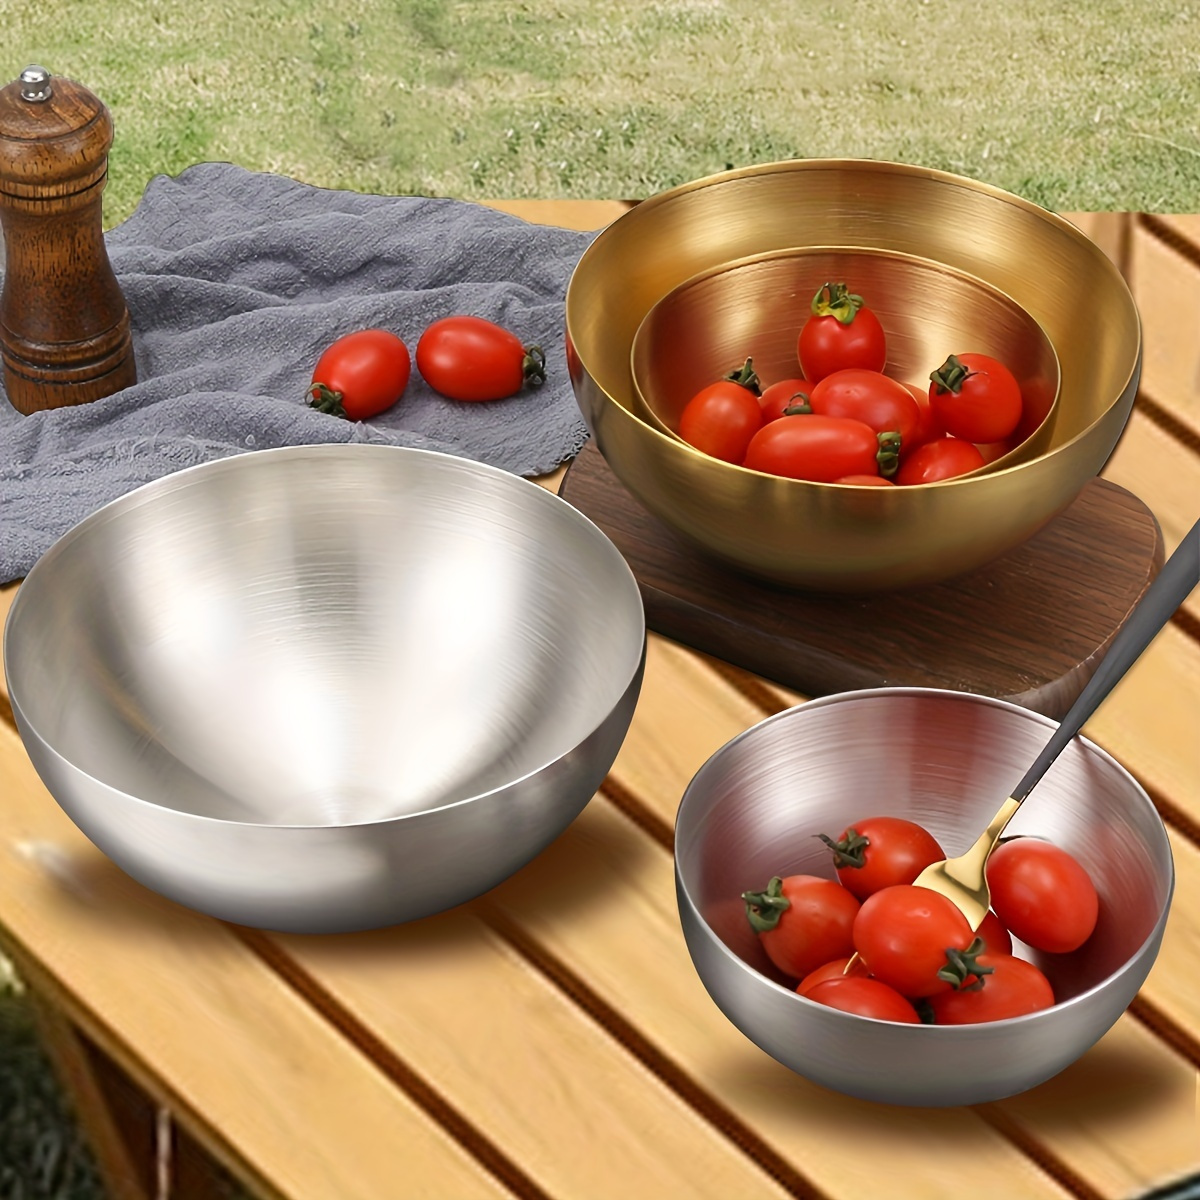 Stainless Steel Bowl Set Double-walled Insulated Metal Snack Bowls